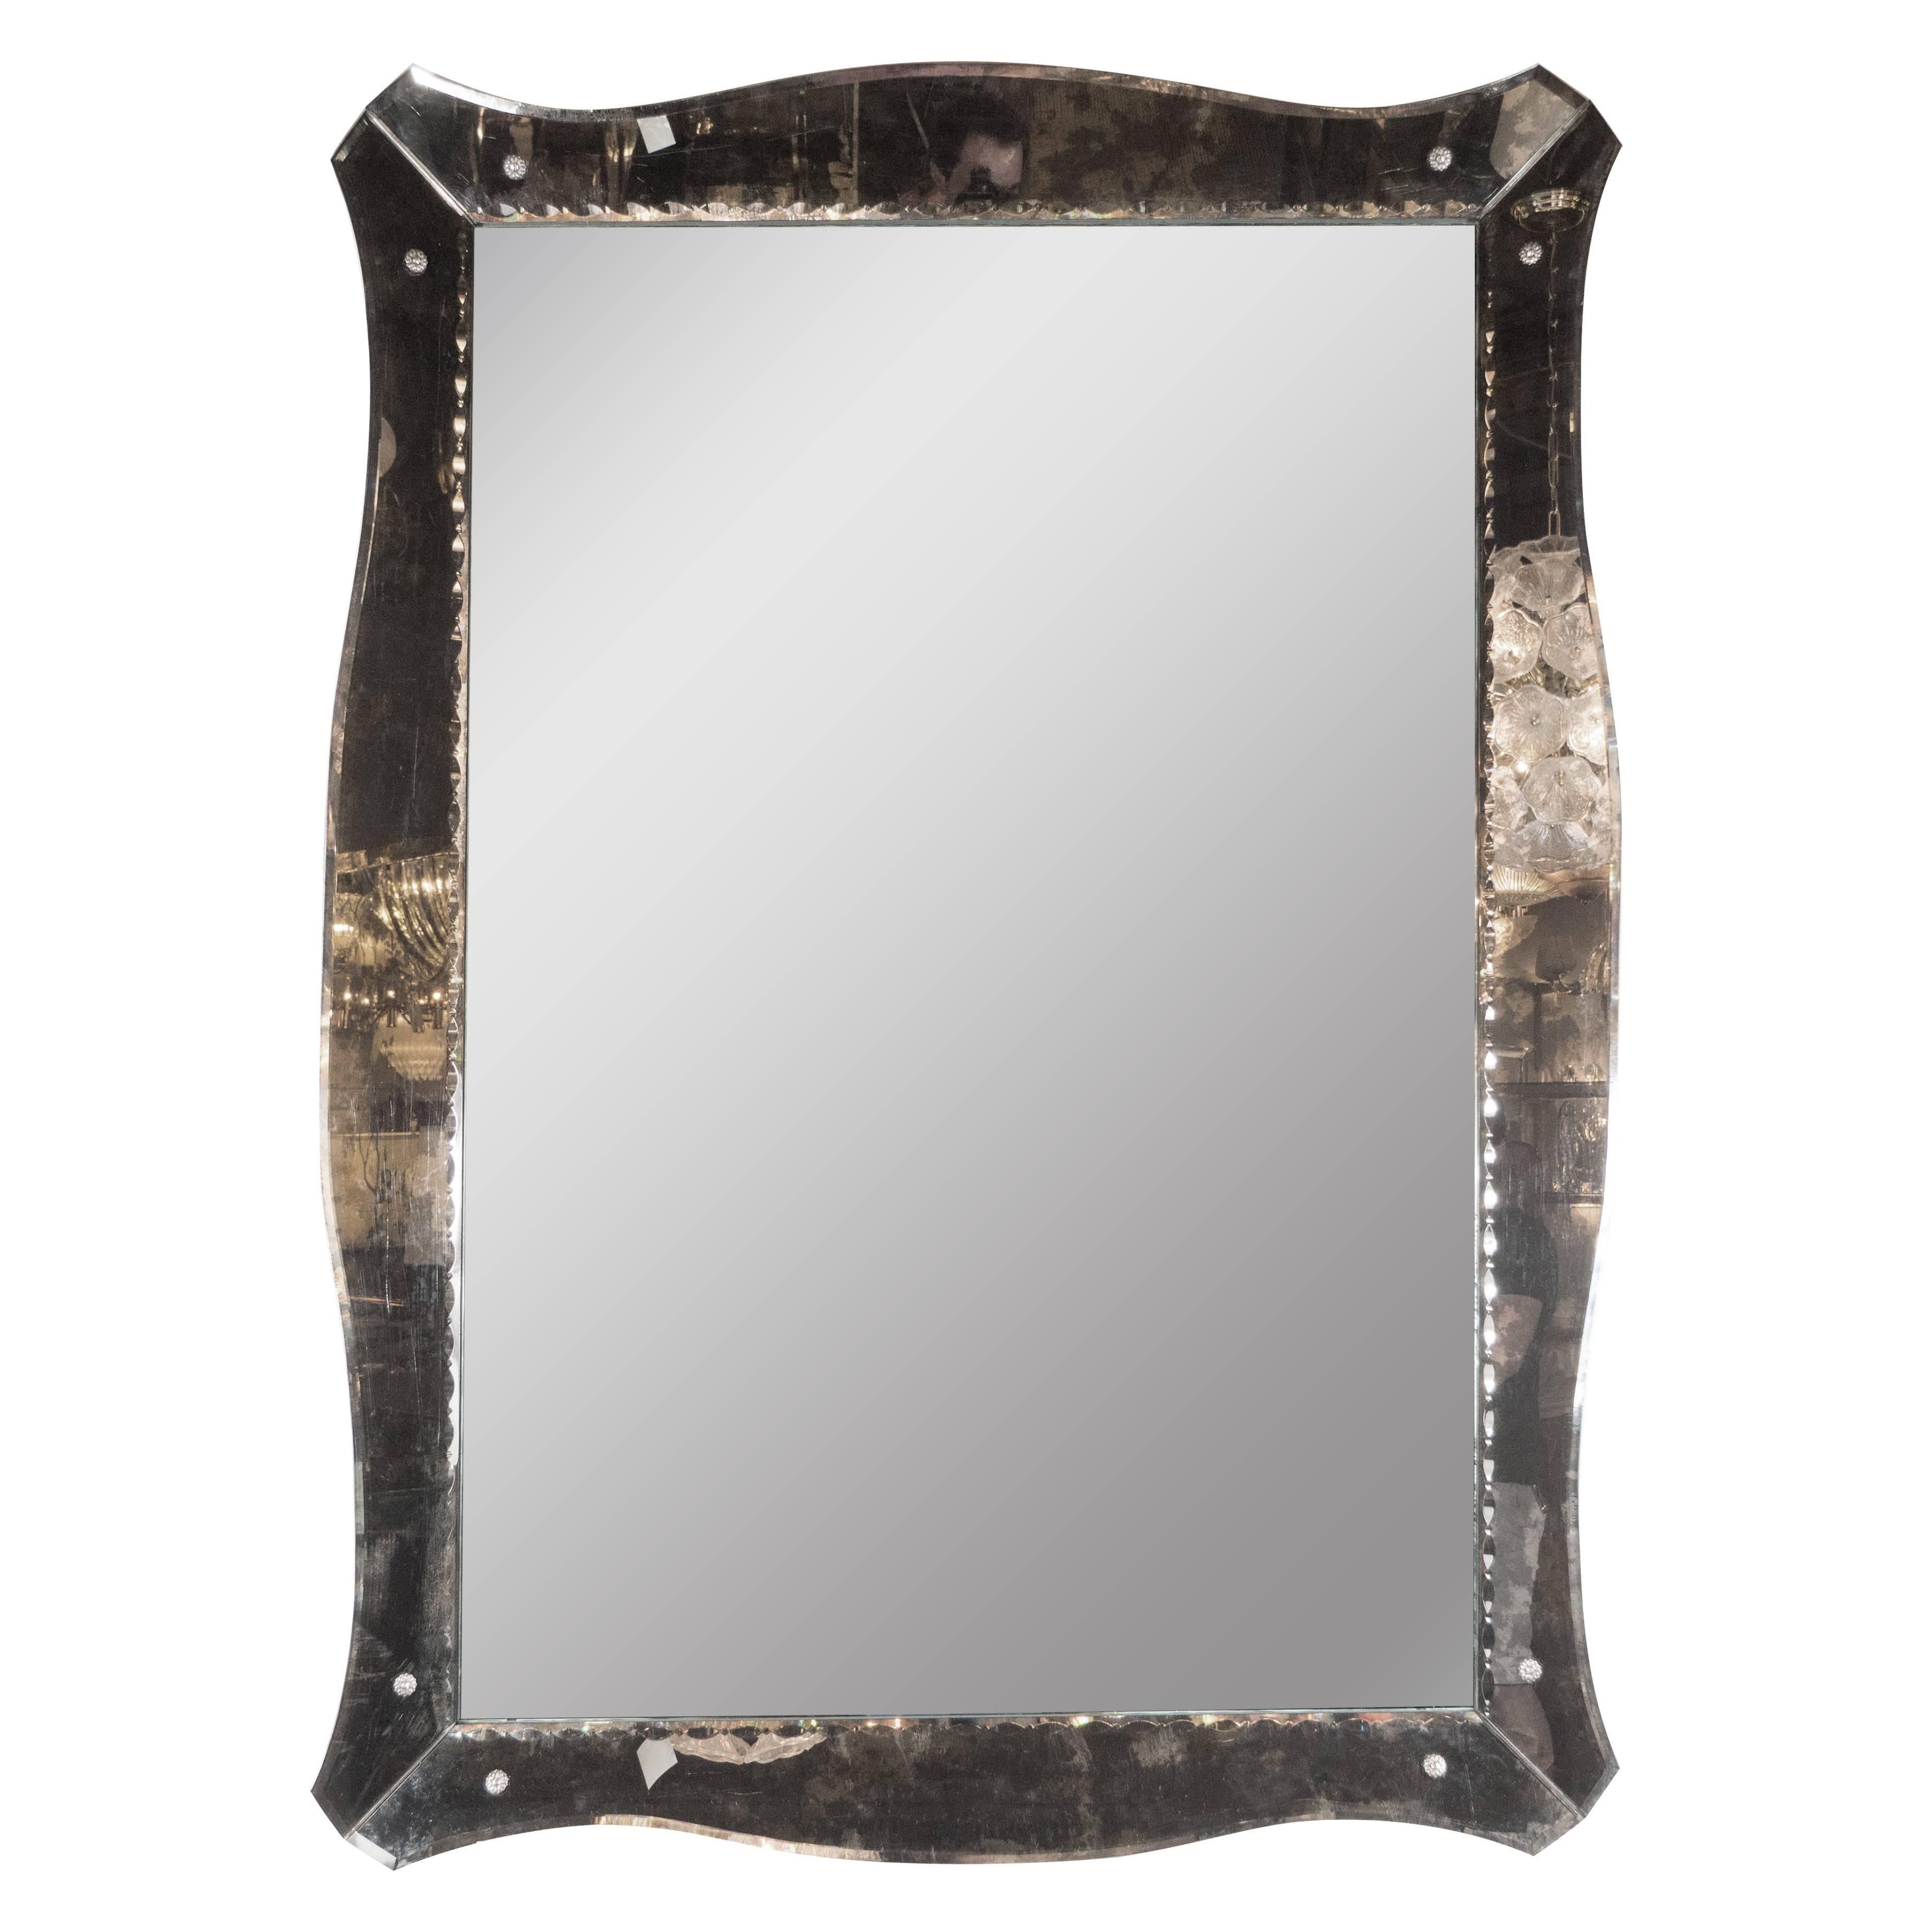 1940s, Smoked Mirror with Chain Beveled Details and Scalloped Edges